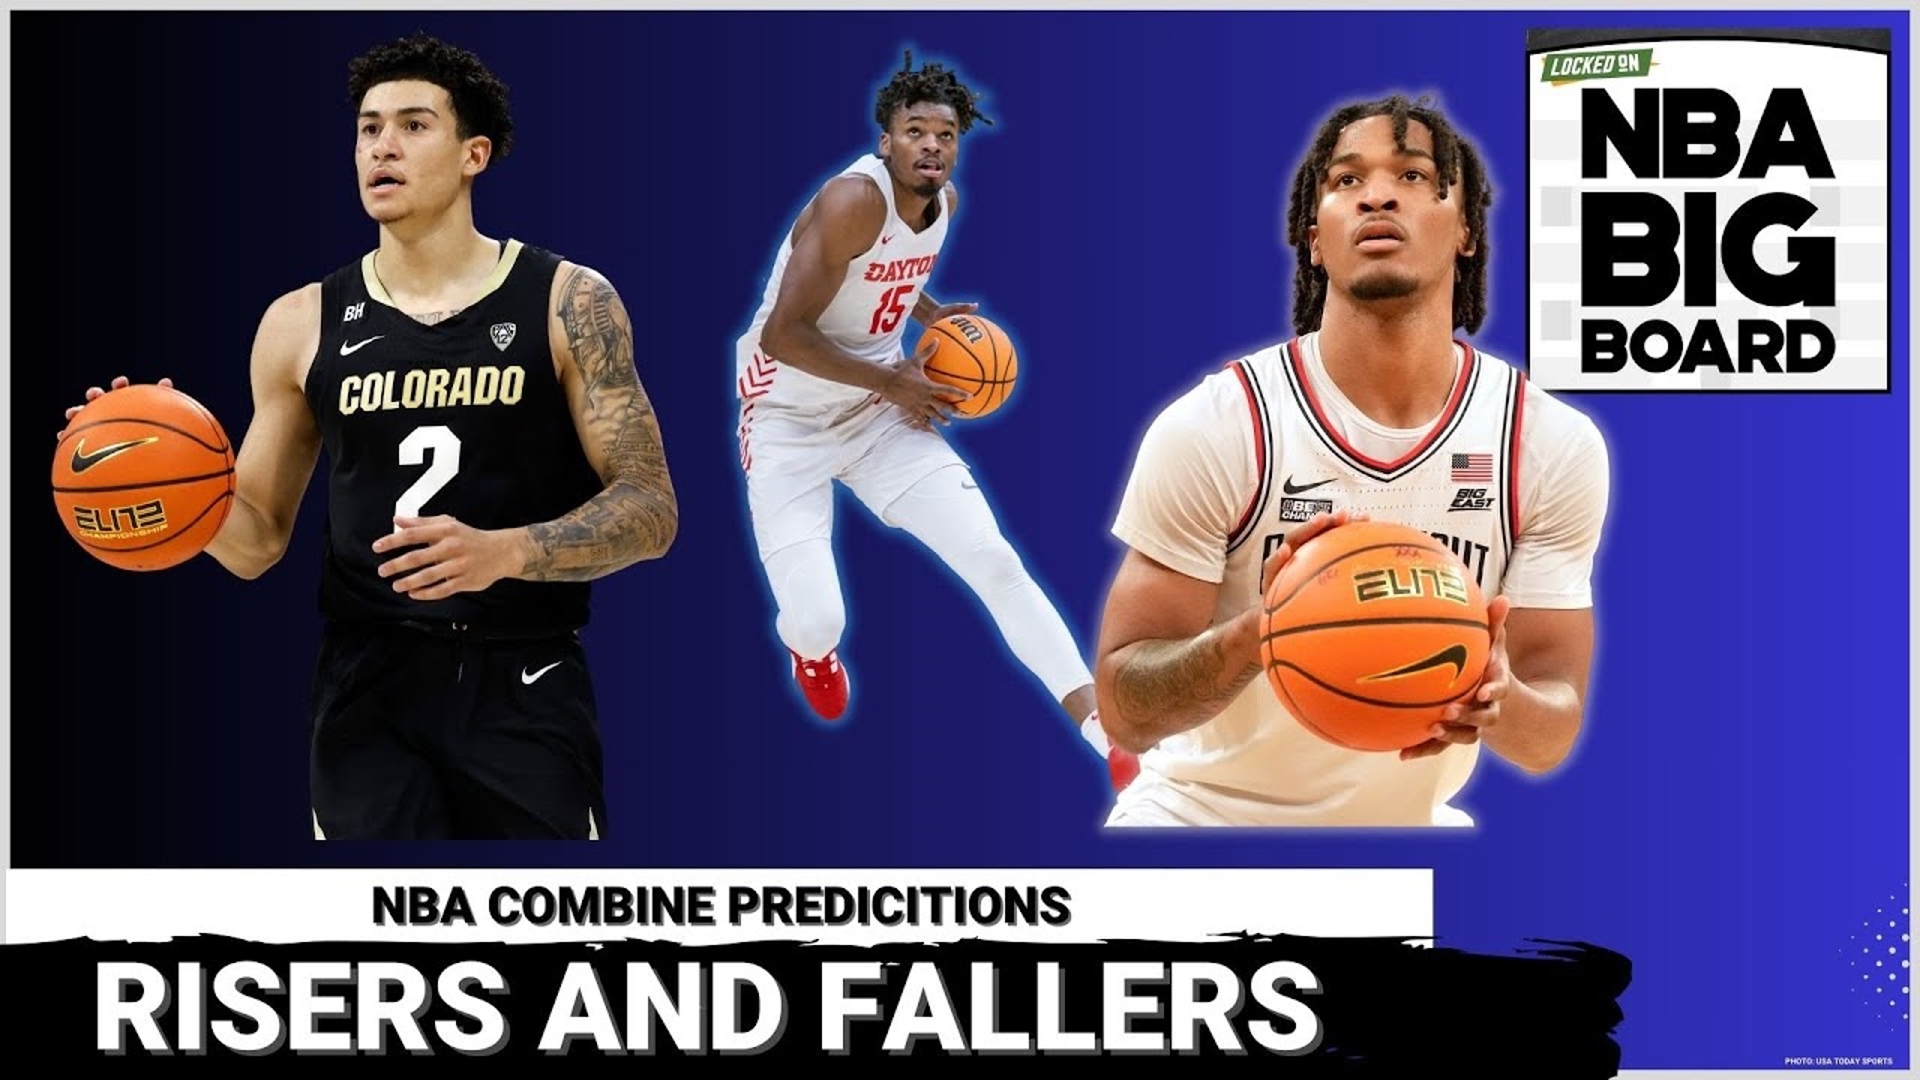 Rich and James preview the NBA Draft Combine, from who has the most to lose and most to gain, to predicting the risers and fallers of the Combine.